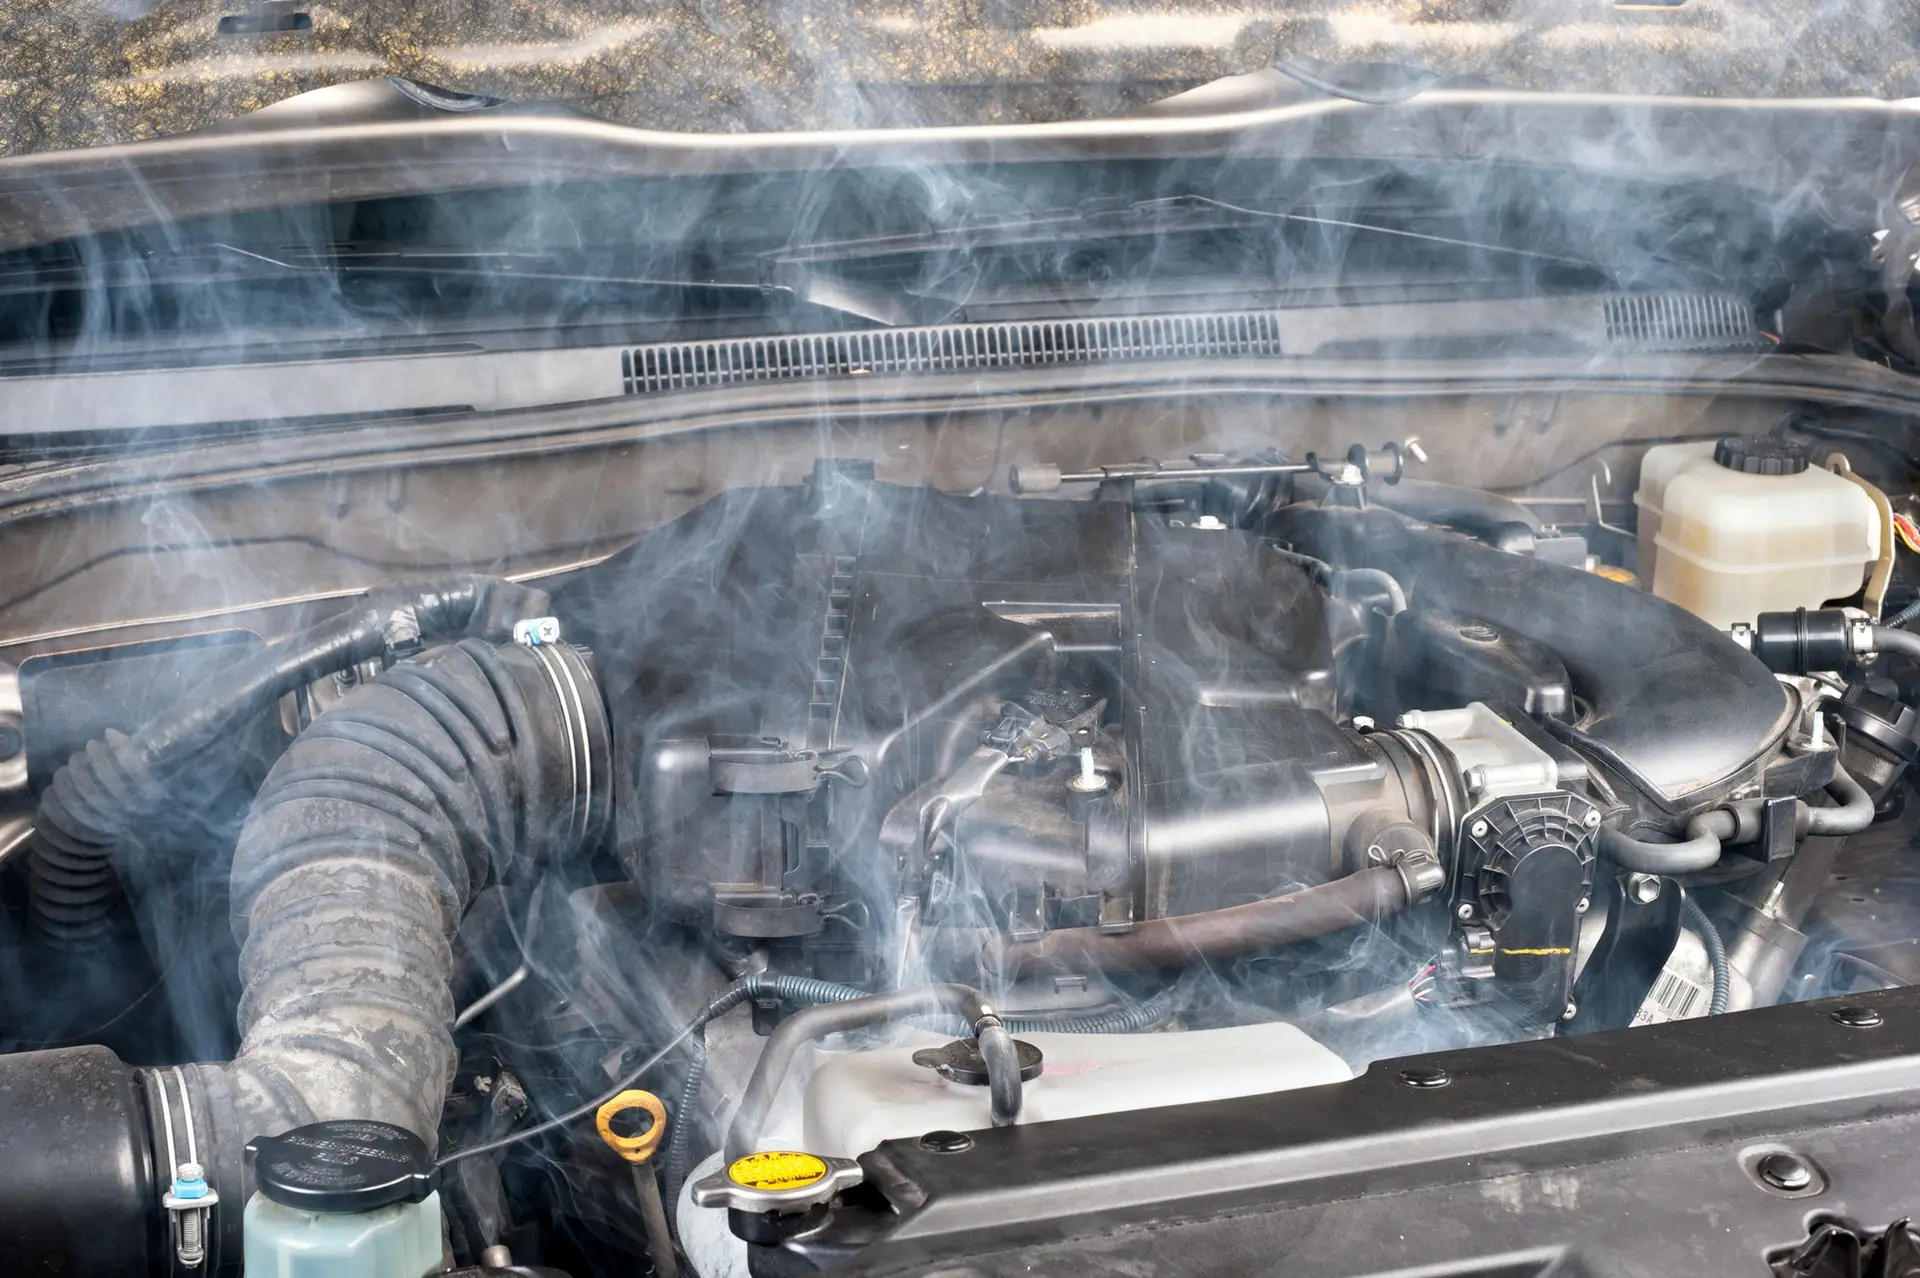 How Do You Tell If an Engine Is Damaged From No Oil? Car engine